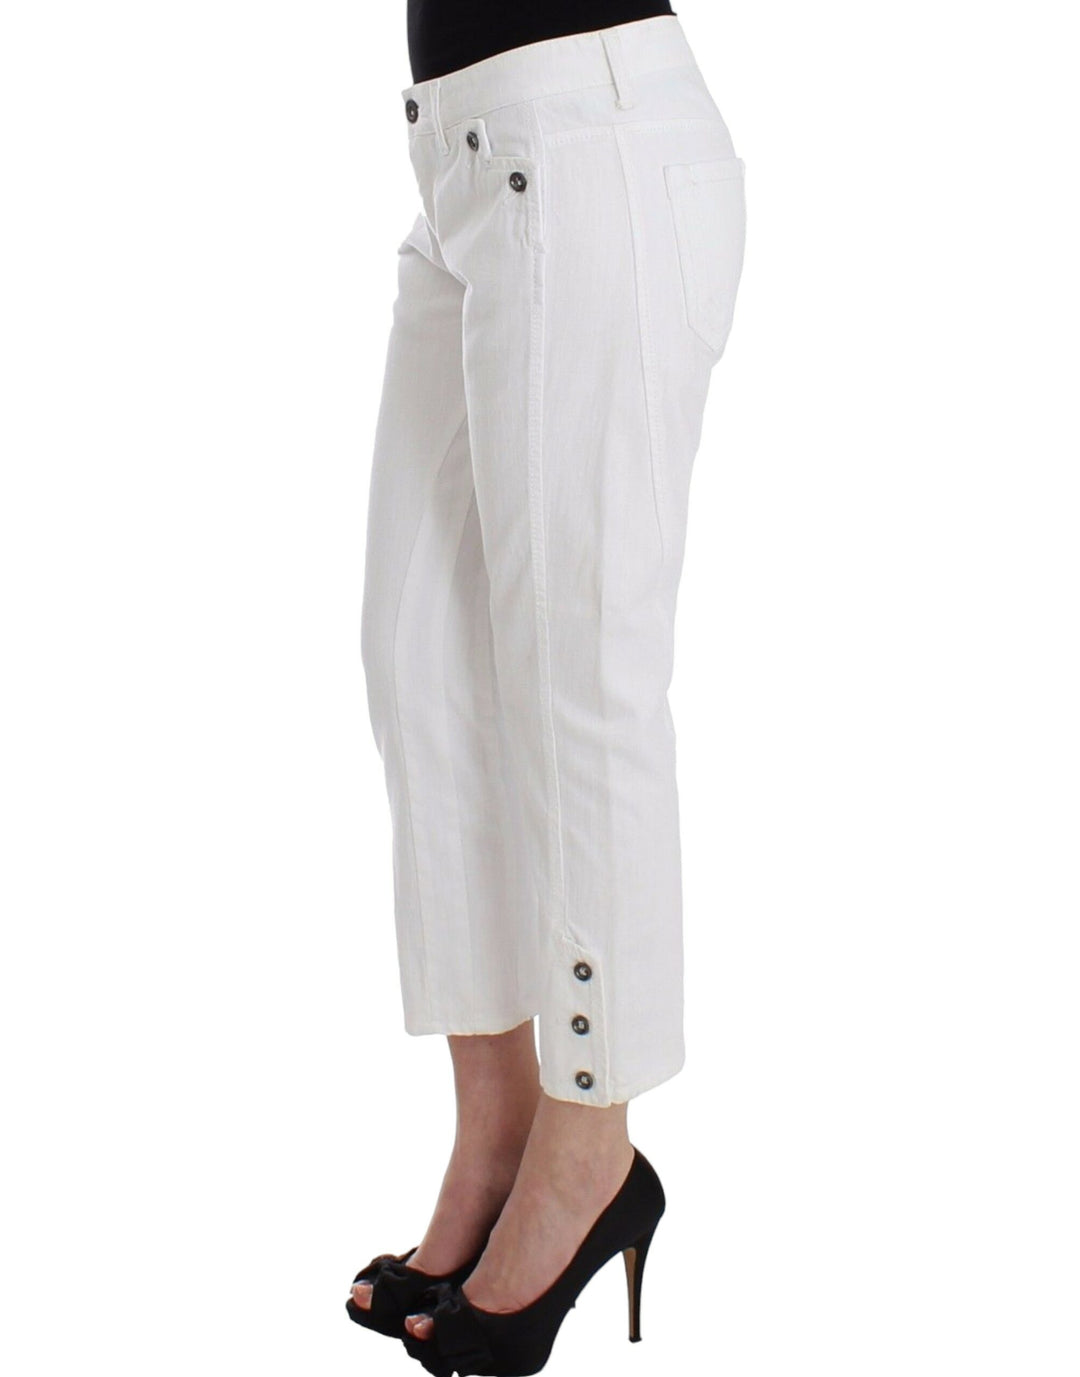 Ermanno Scervino Chic White Cropped Jeans for Sophisticated Style